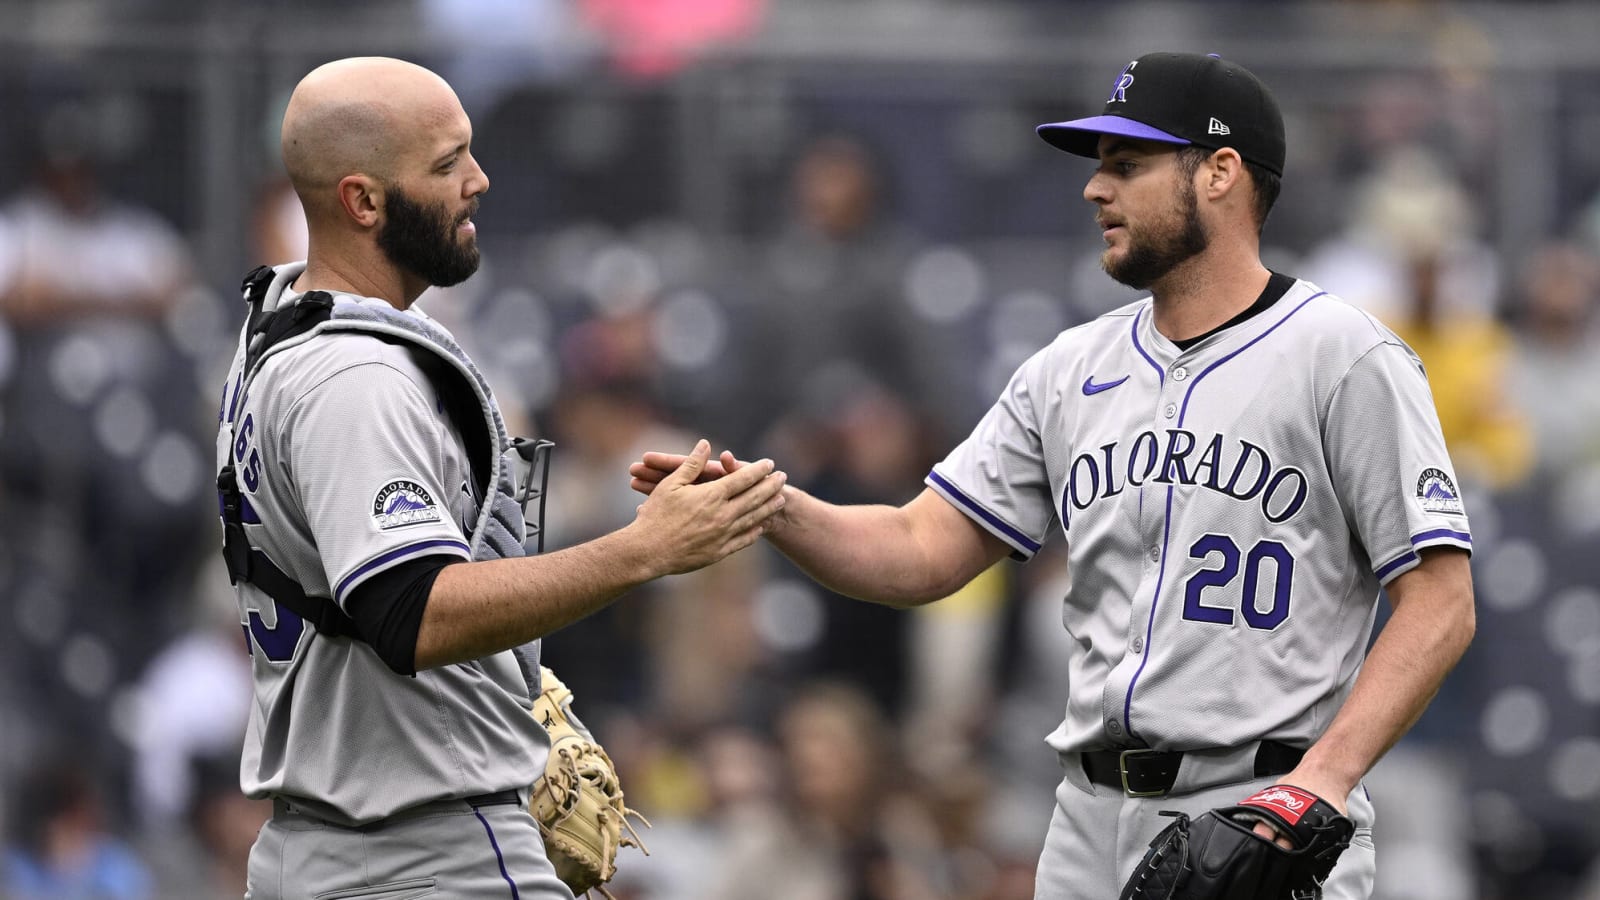 Colorado Rockies Continue Tremendous Play With 7th Straight Victory